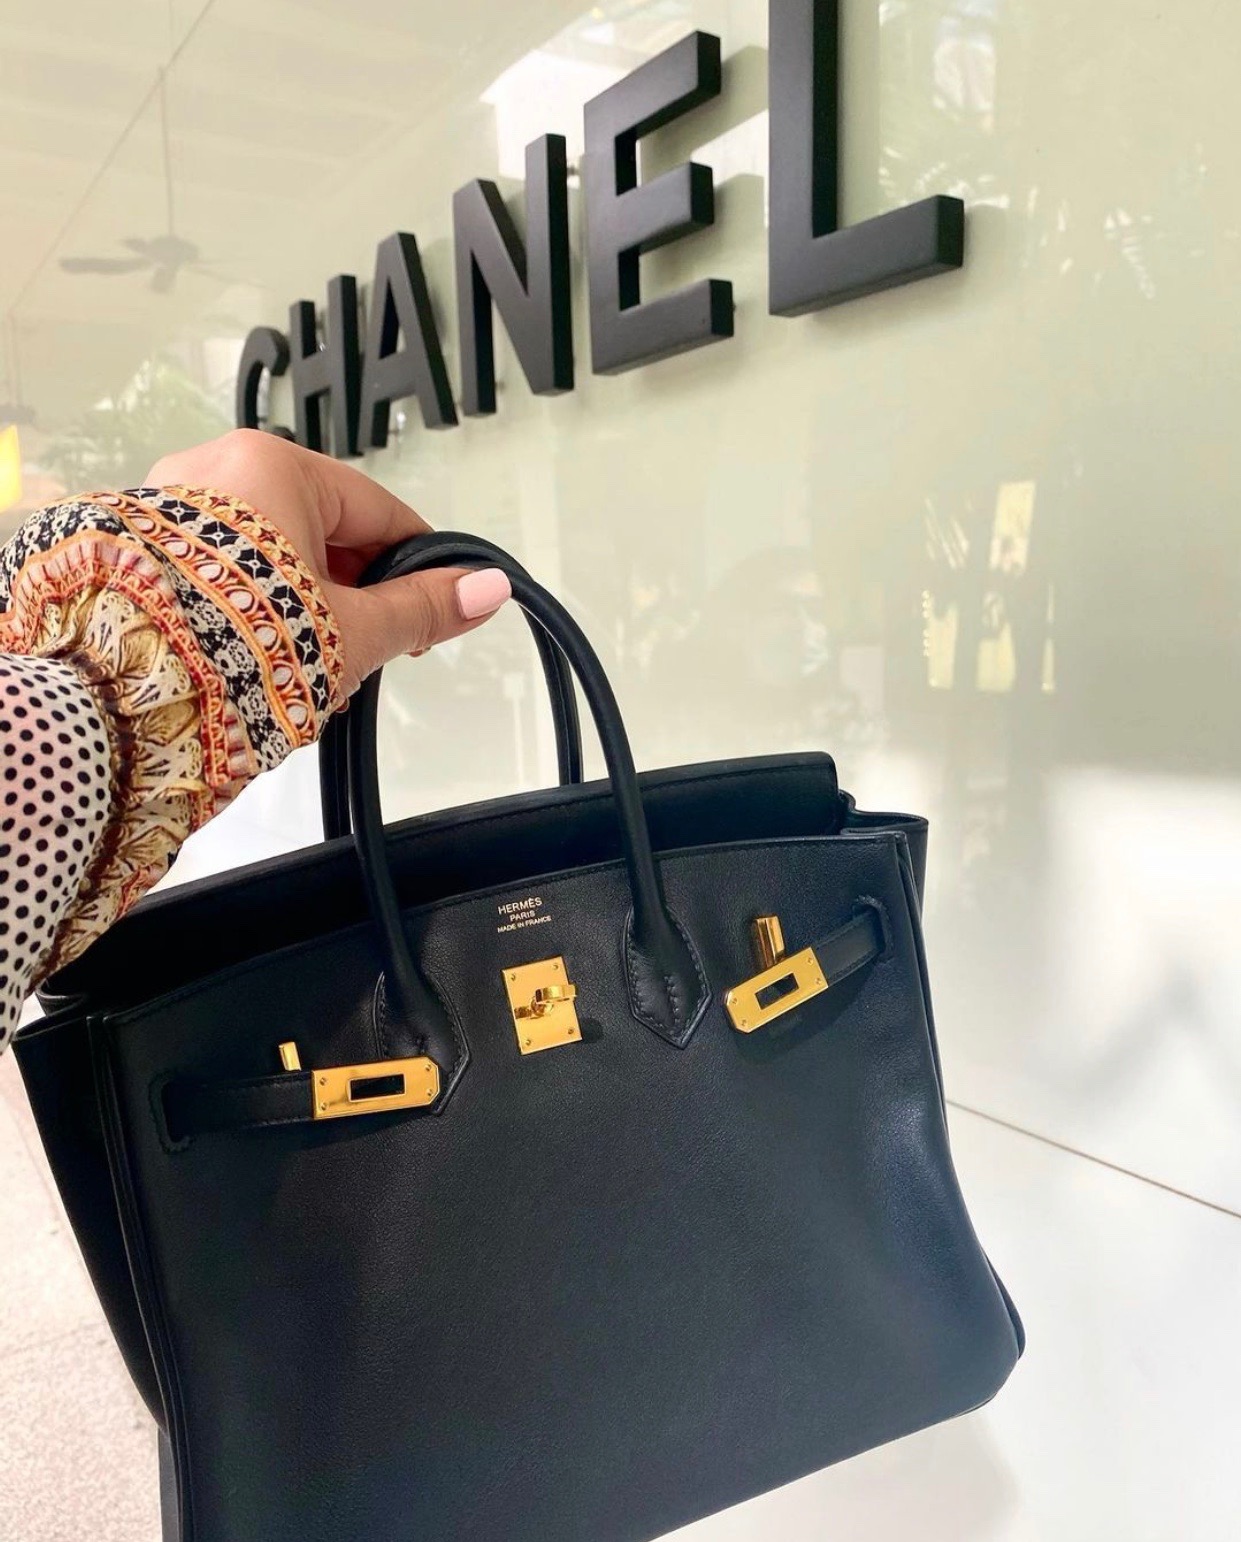 OnQueStyle on Instagram: The most amazing Hermes Birkin 35cm